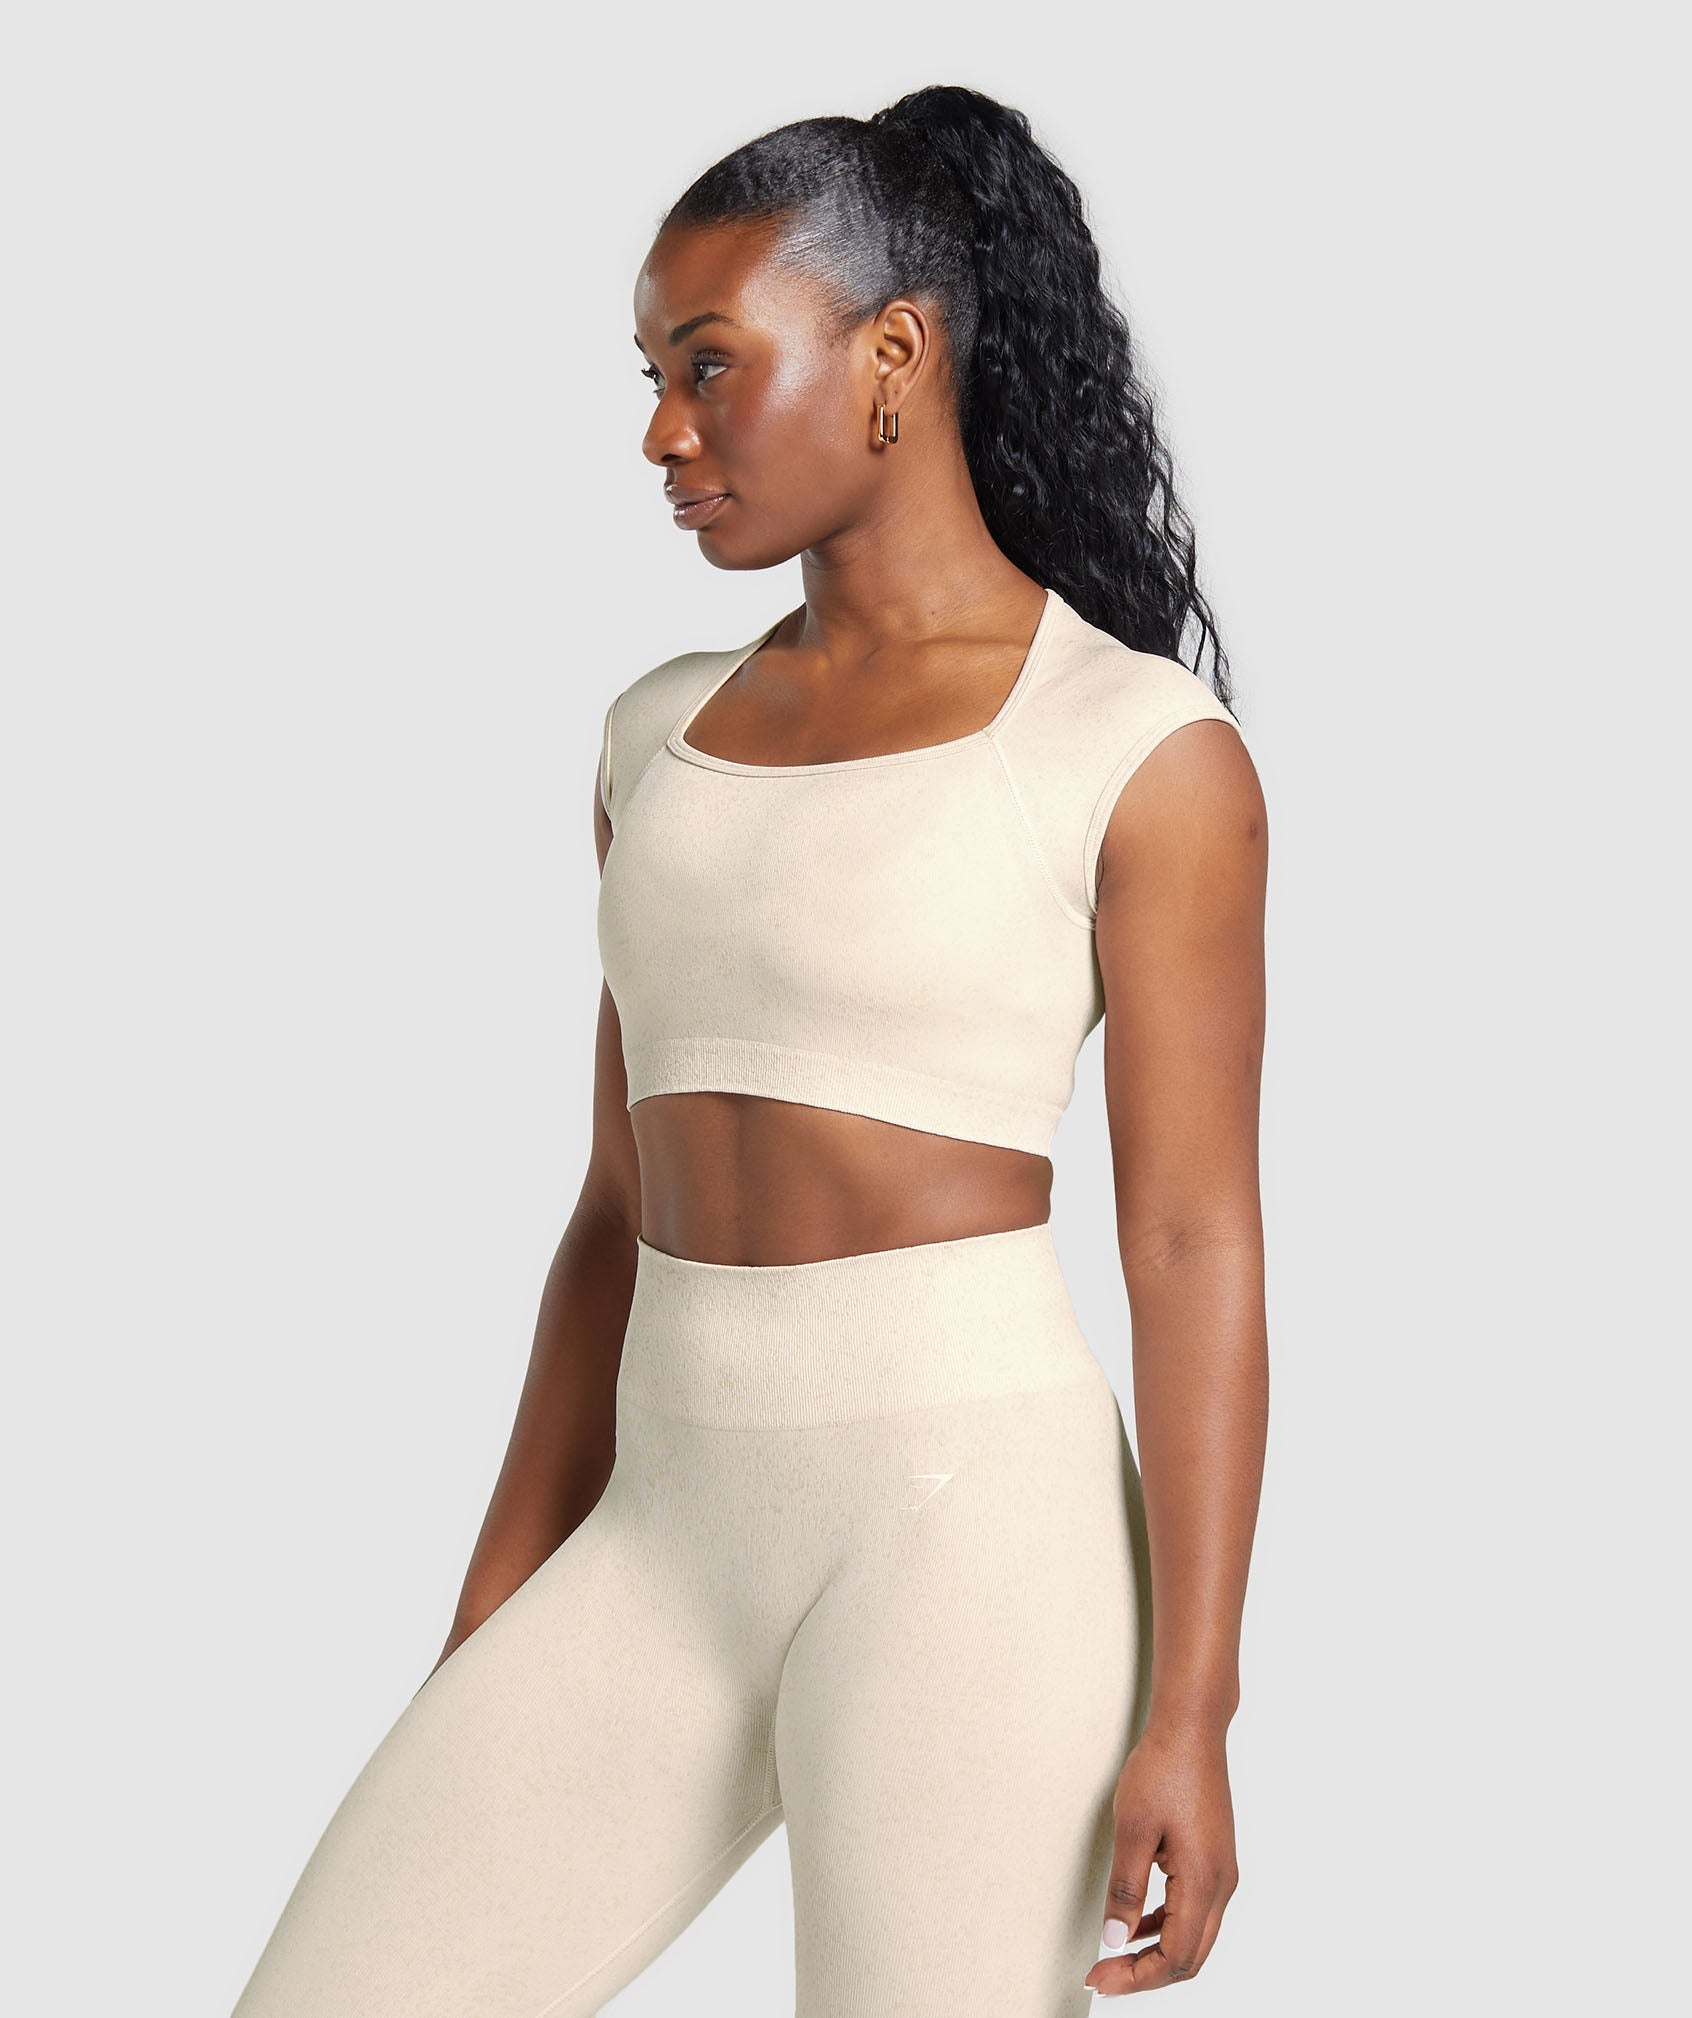 Adapt Fleck Seamless Crop Top in Coconut White - view 3